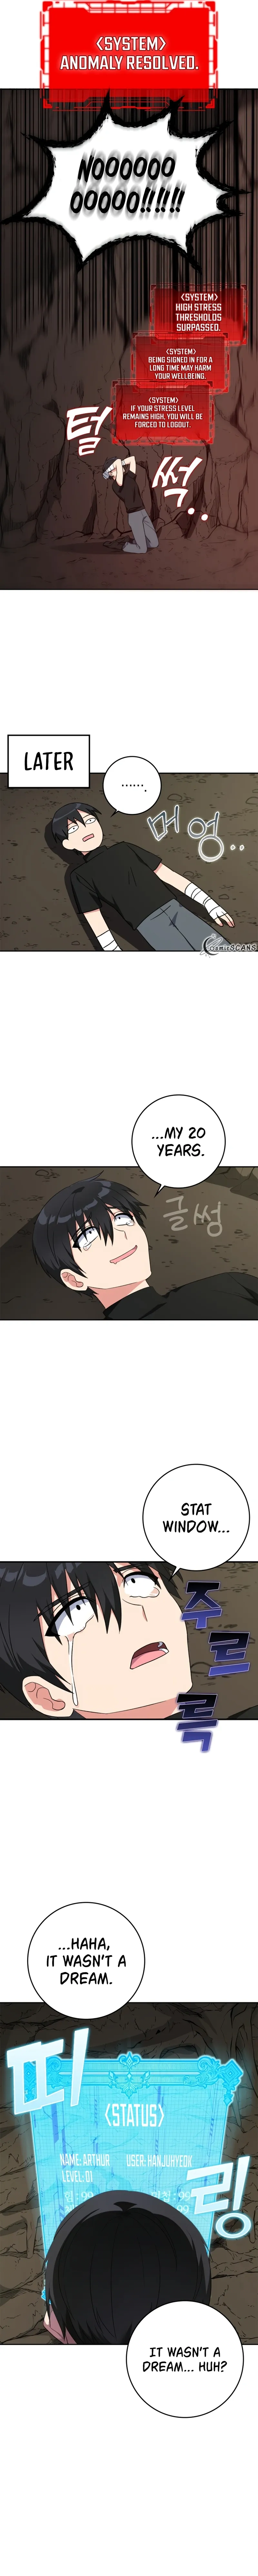 Max Level Player - Chapter 1 - Top Manhua